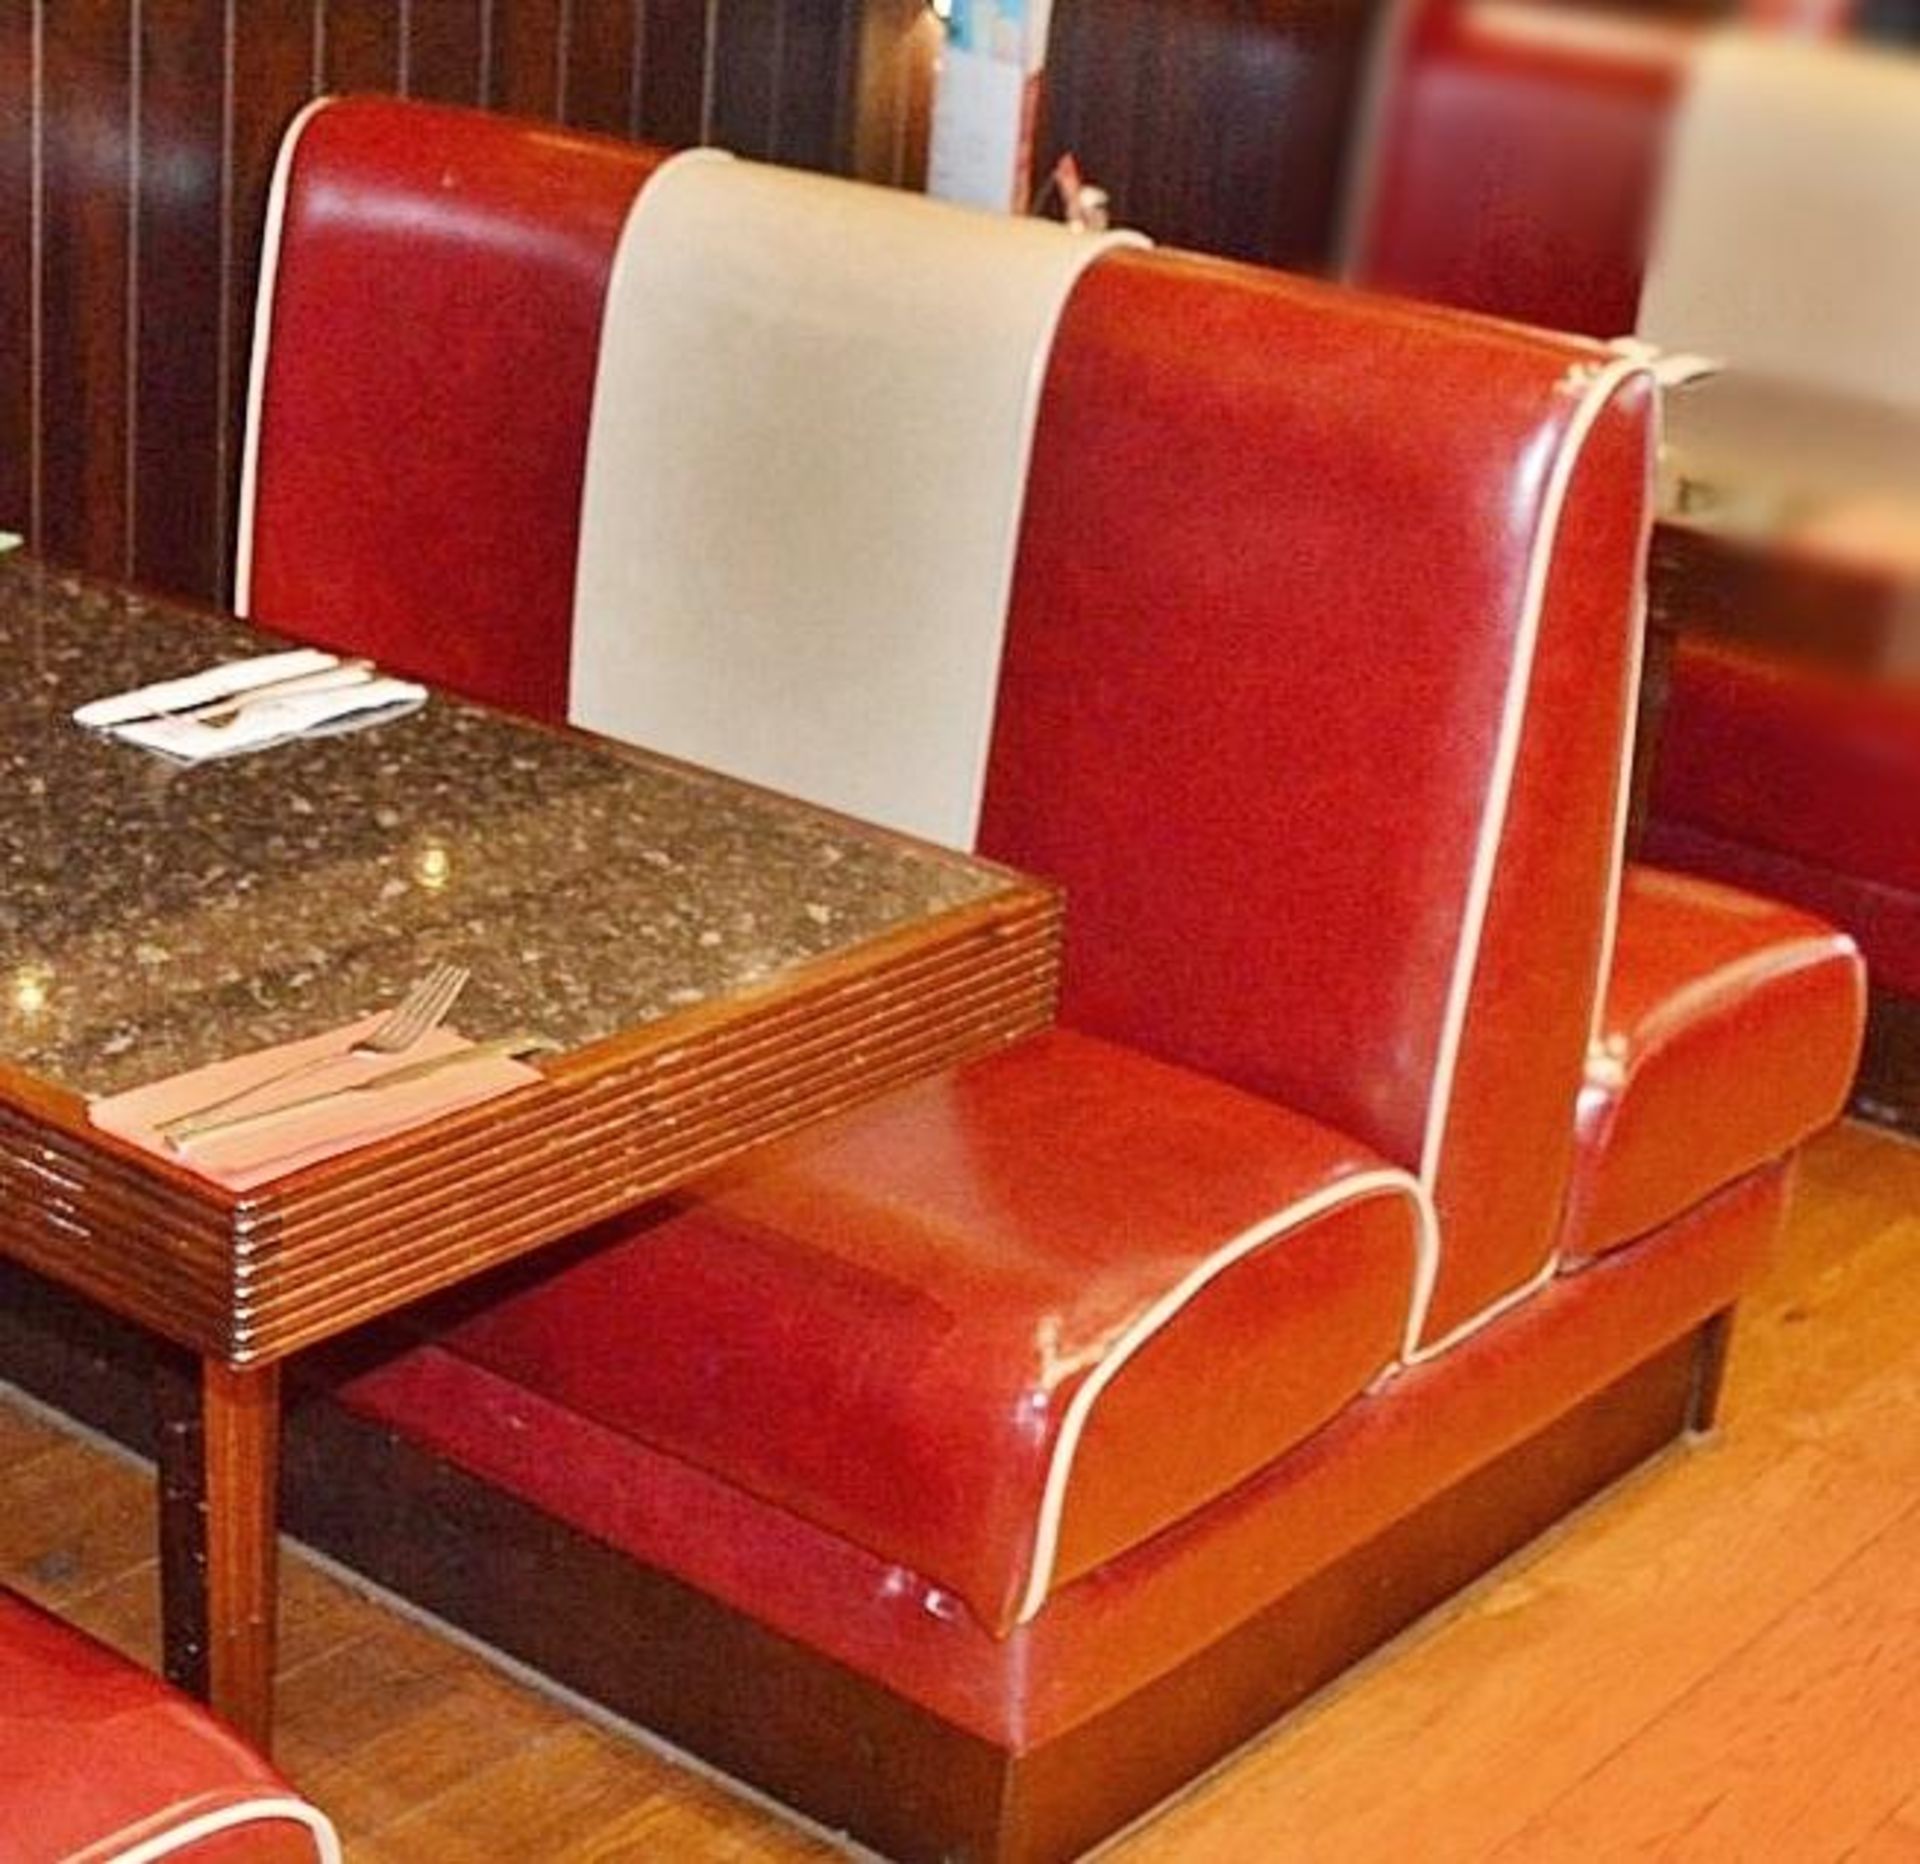 4 x Contemporary Double-Sided Booth Seating Benches - All Upholstered In A Bright Red Faux Leather - - Image 3 of 4